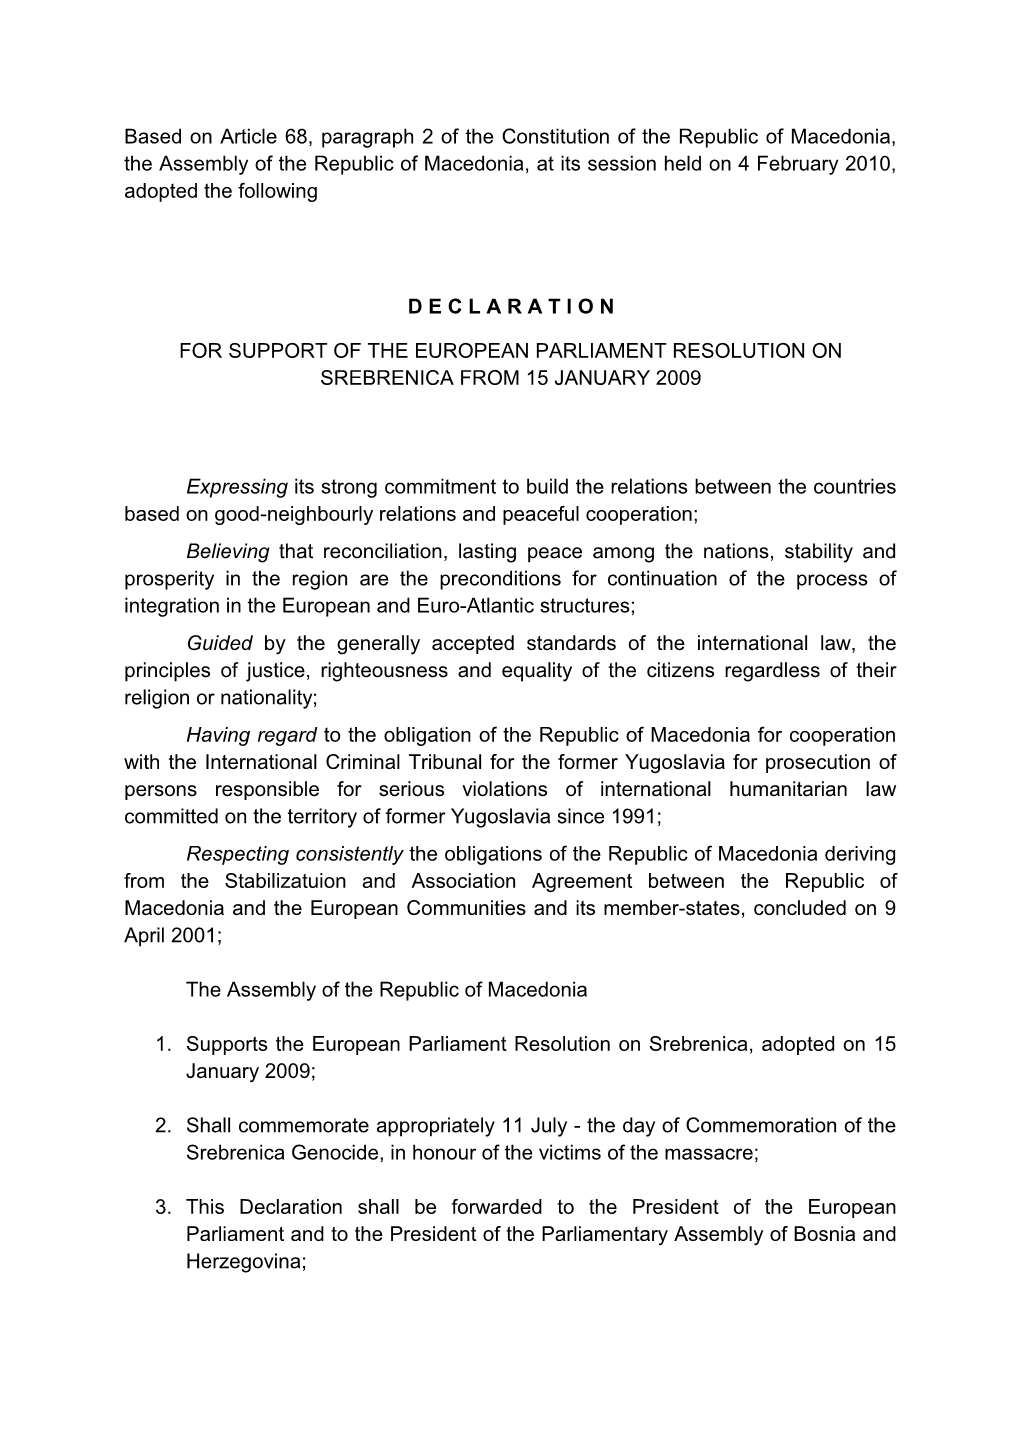 For Support of the European Parliament Resolution on Srebrenica from 15 January 2009